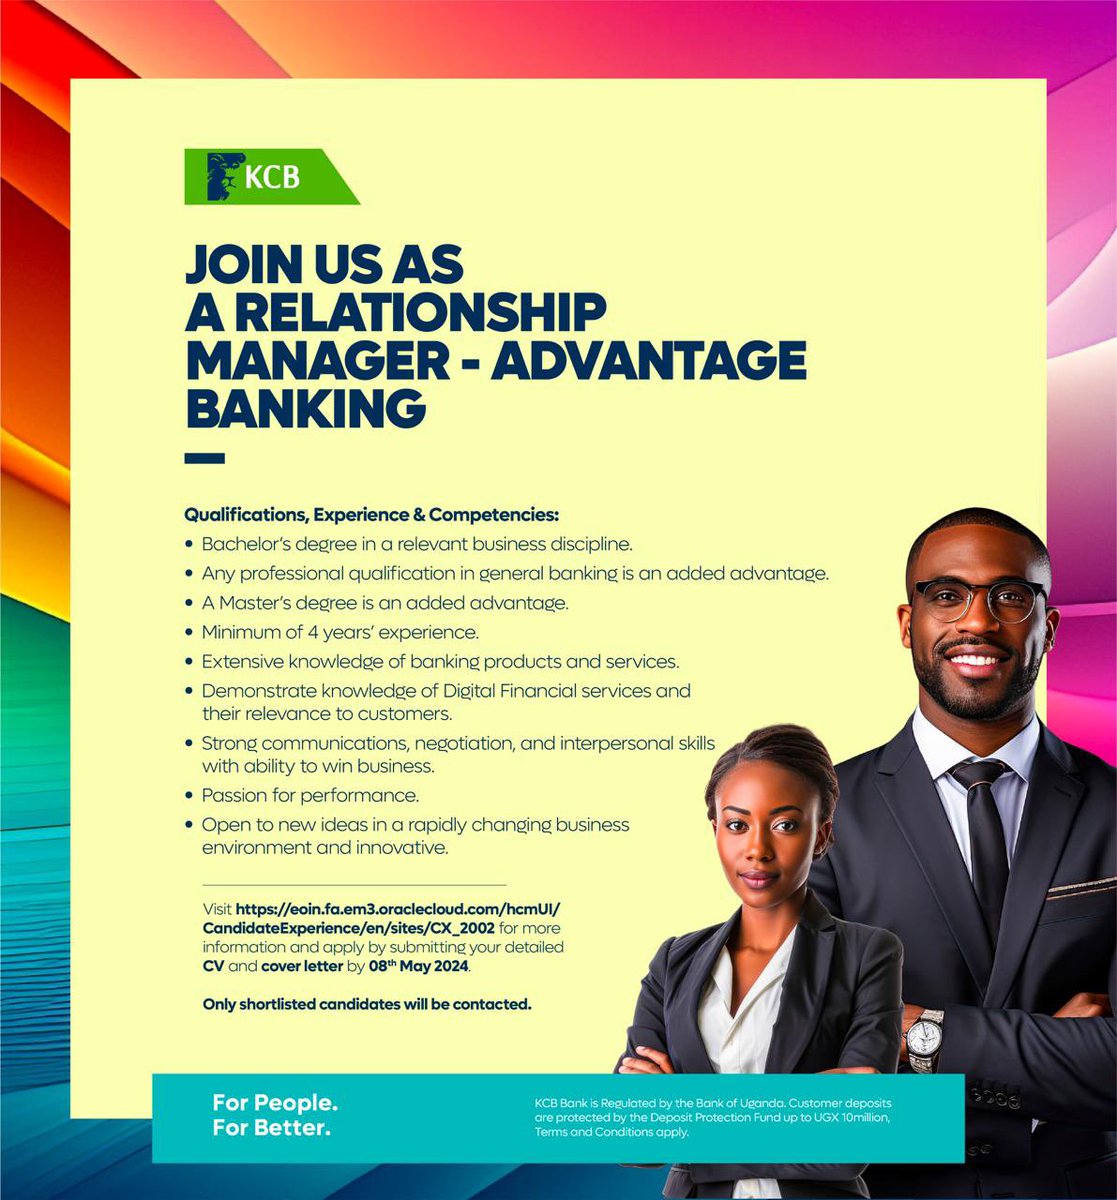 🚨 Job Ad 🚨 Join our team as a Relationship Manager- Advantage Banking. Apply before 08th May Apply via bit.ly/48bQ5OJ #ForPeopleForBetter